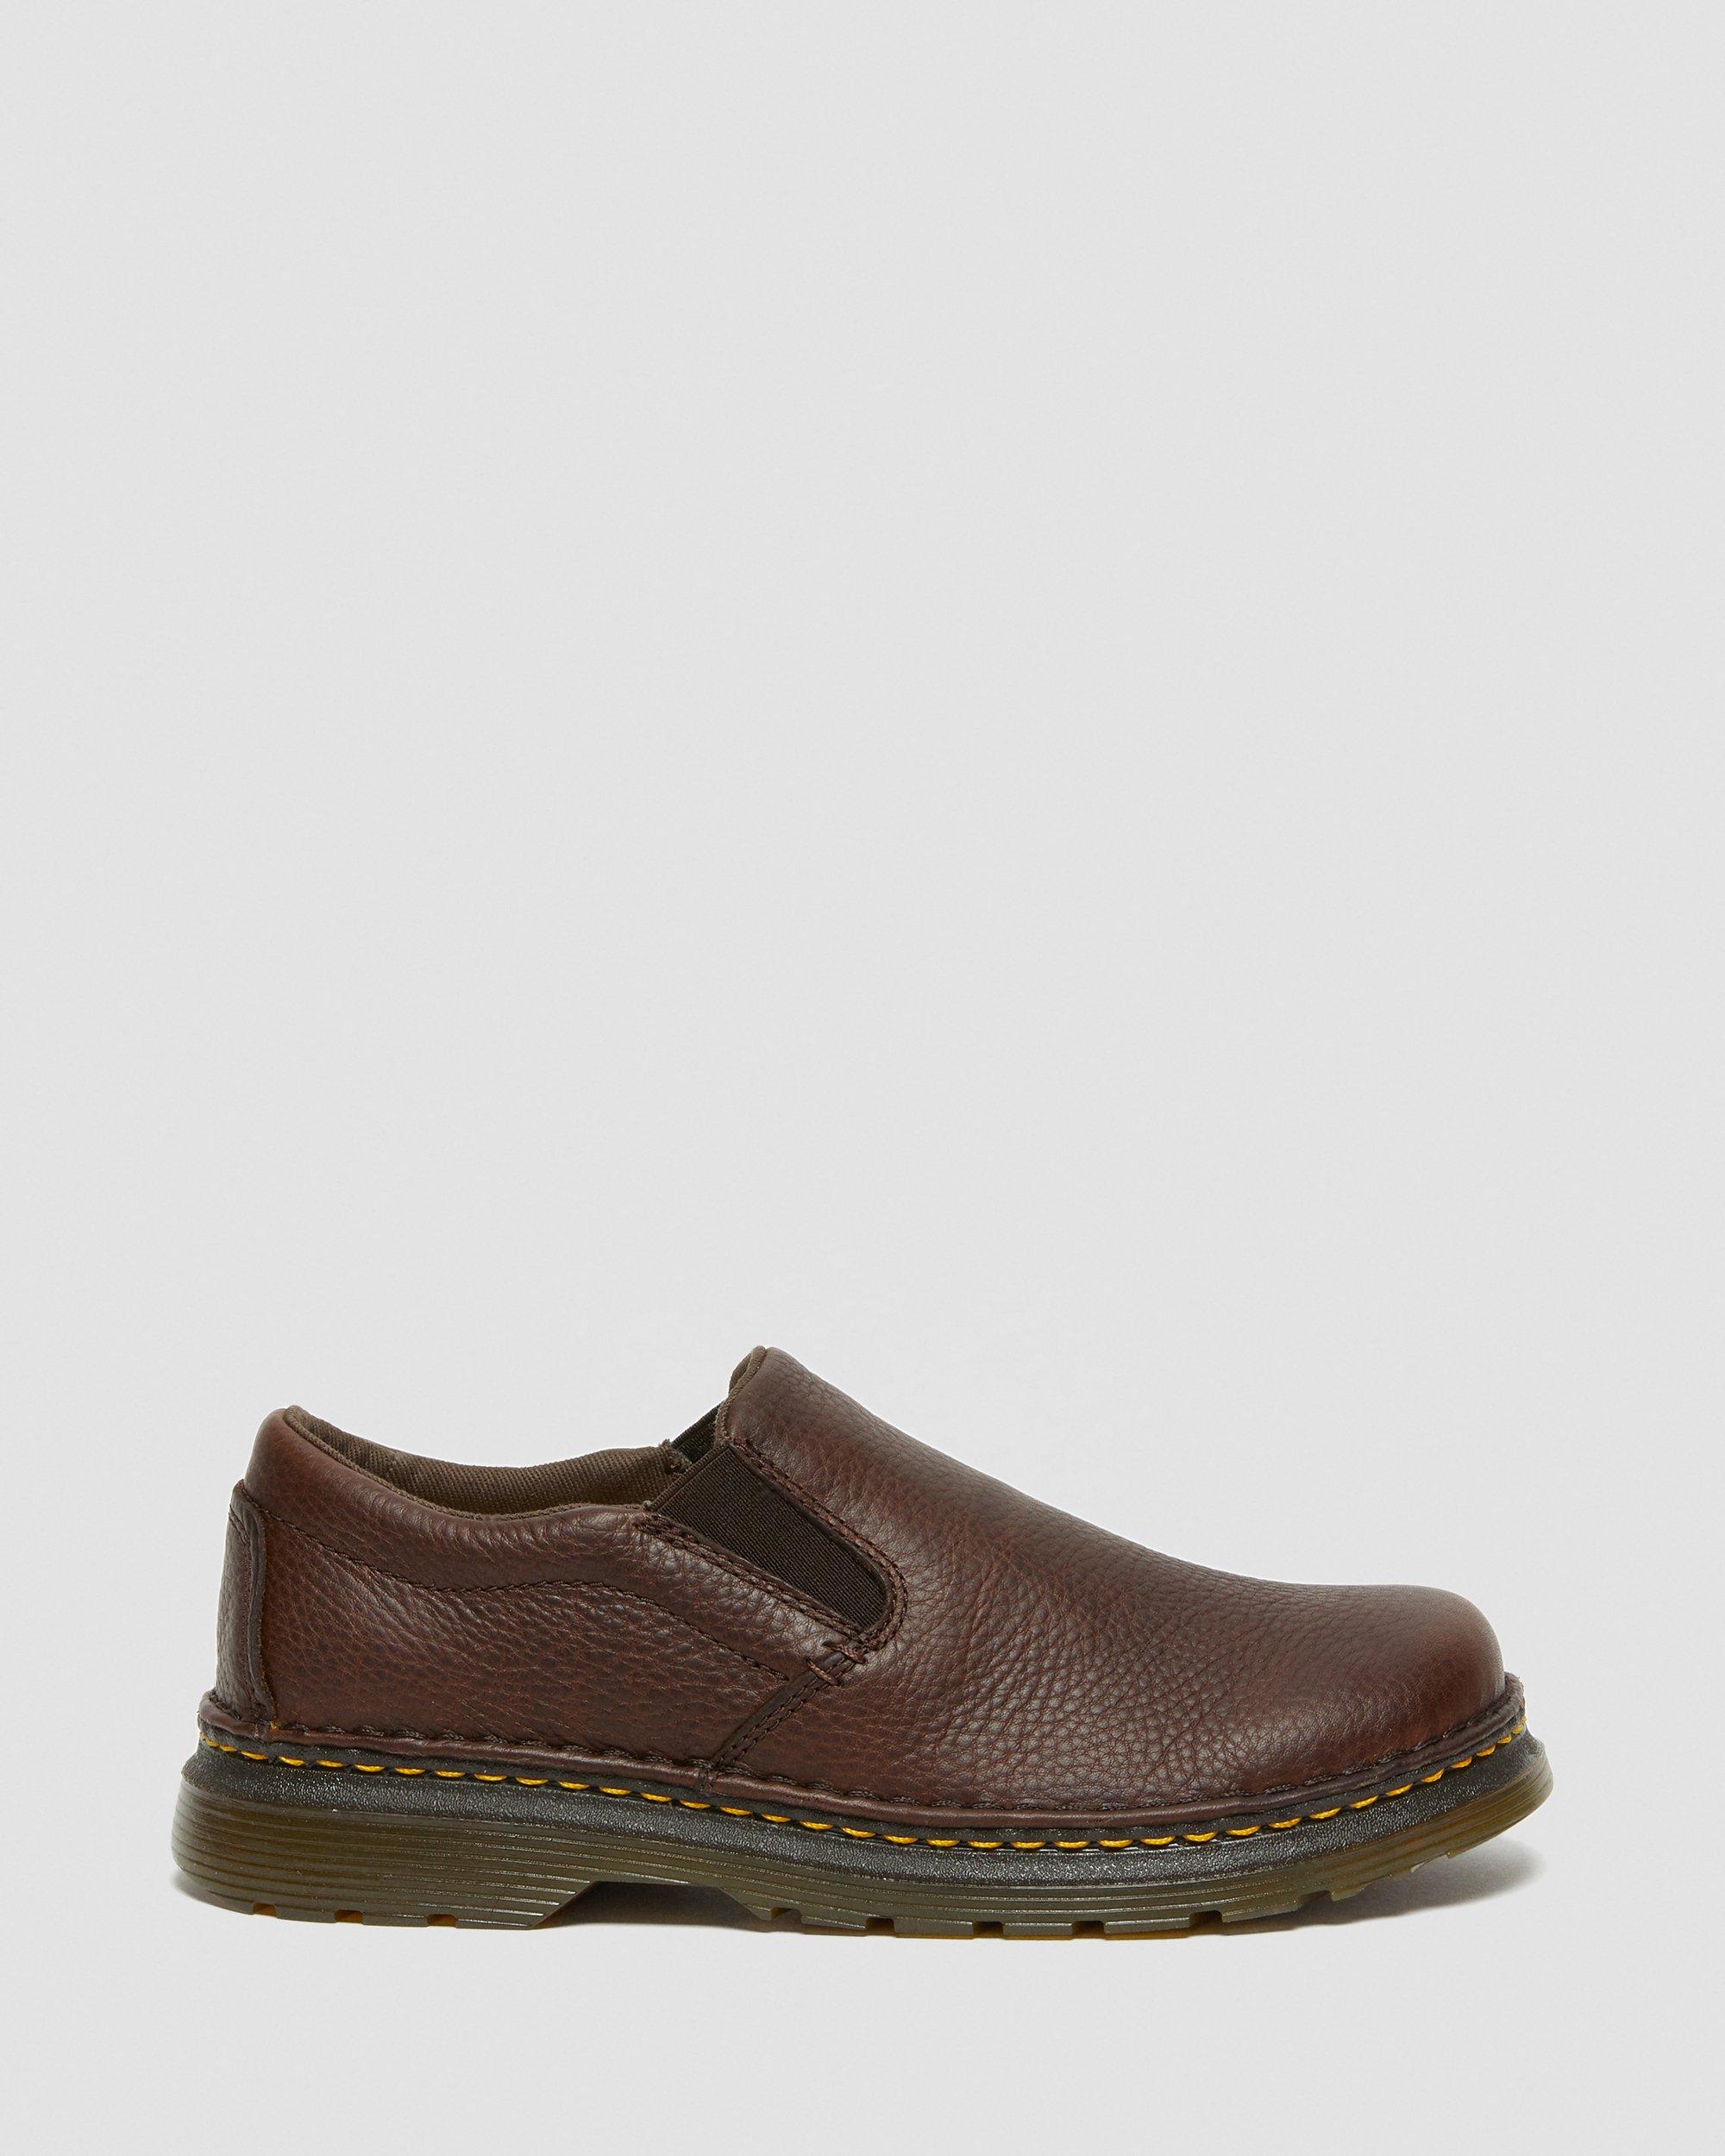 BOYLE MEN'S GRIZZLY LEATHER SLIP ON 